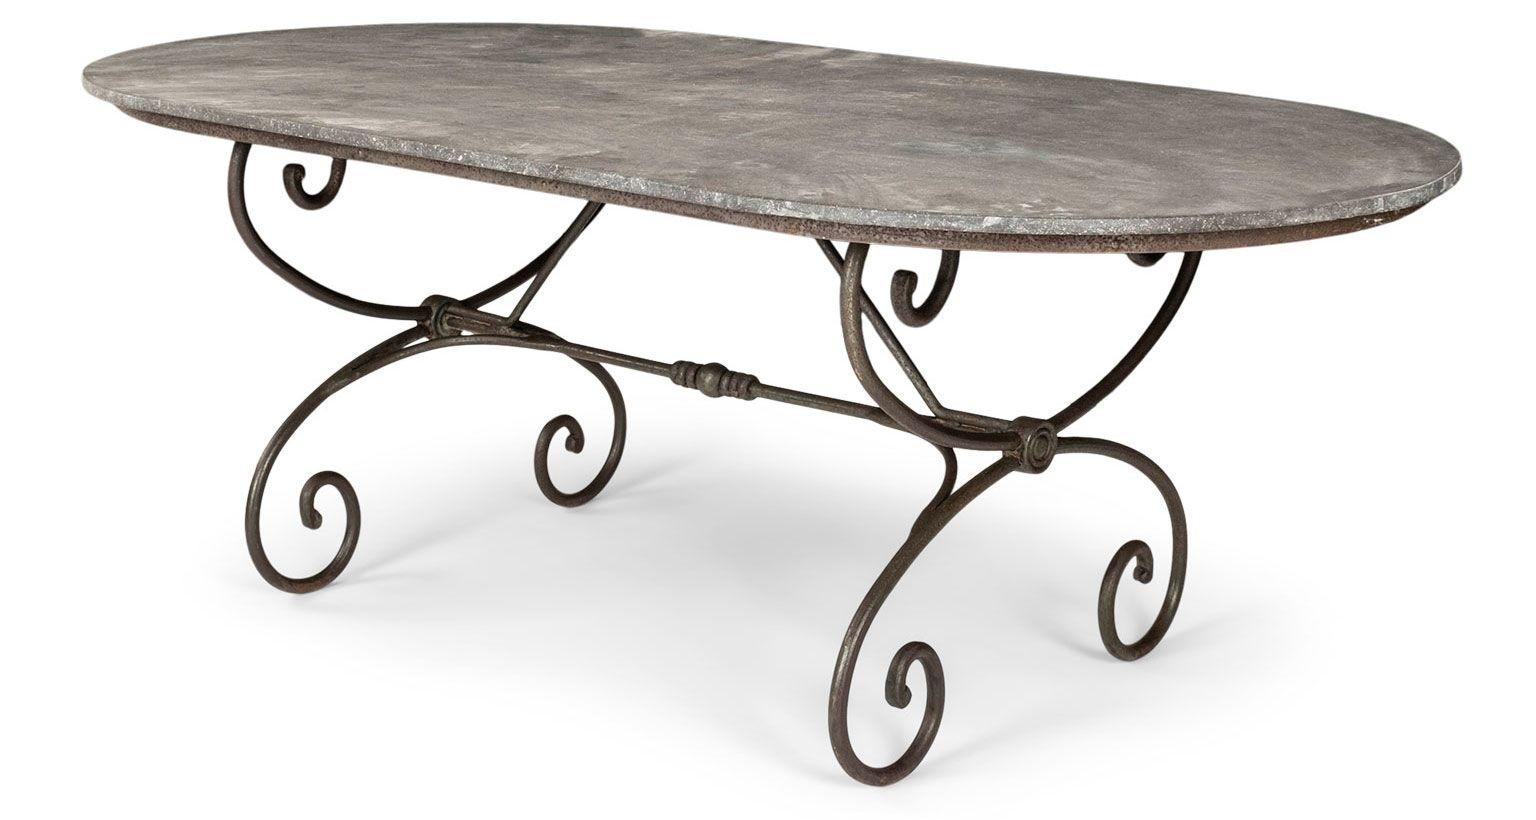 Large oval-shape Belgian bluestone top dining table raised upon scrolled iron base. Vintage dark bluestone top with unhoned texture from years of exposure and use. Late 19th century iron base from France.

Note: Original/early finish on antique and